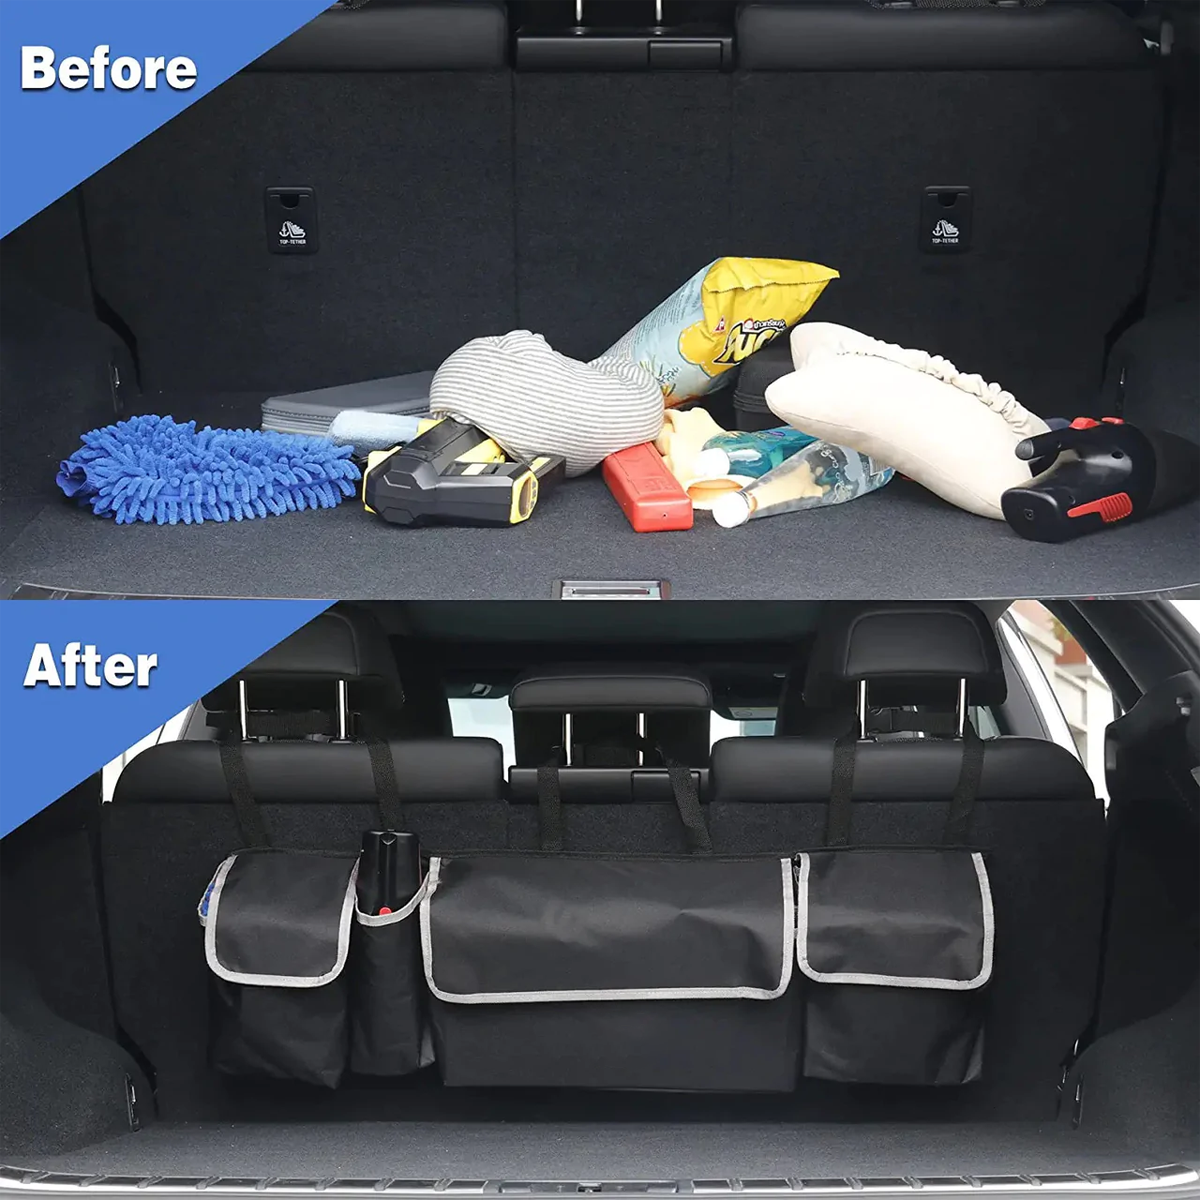 Custom Logo Car Trunk Hanging Organizer, Fit with Volvo, Thick Backseat Trunk Storage Bag with 4 Pockets and 3 Adjustable Shoulder Straps, Foldable Car Trunk Interior Accessories Releases Your Trunk Space